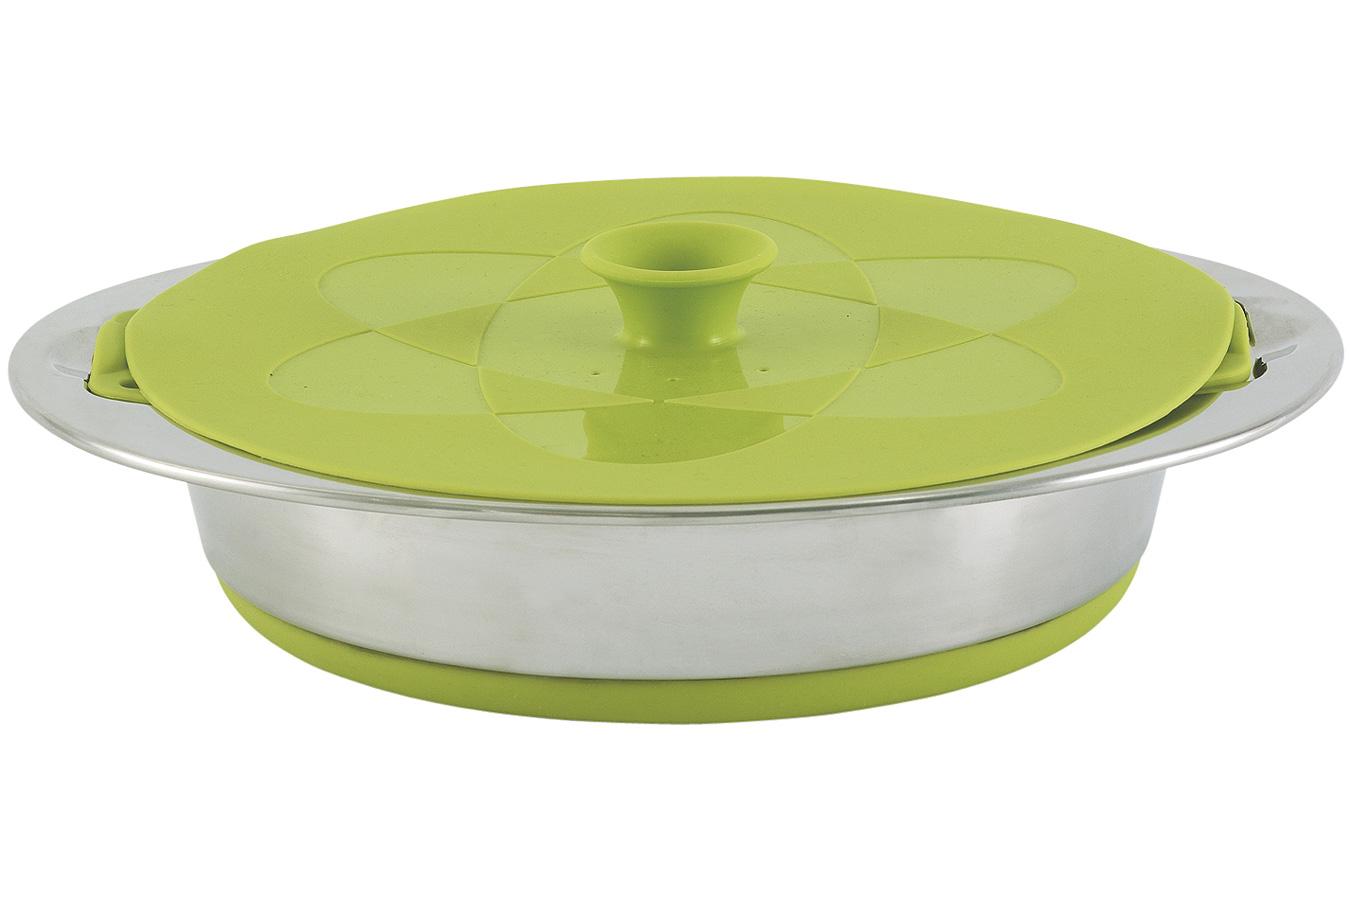 Foto Outwell Collaps Ollas w/colander & lid, 4.5l verde